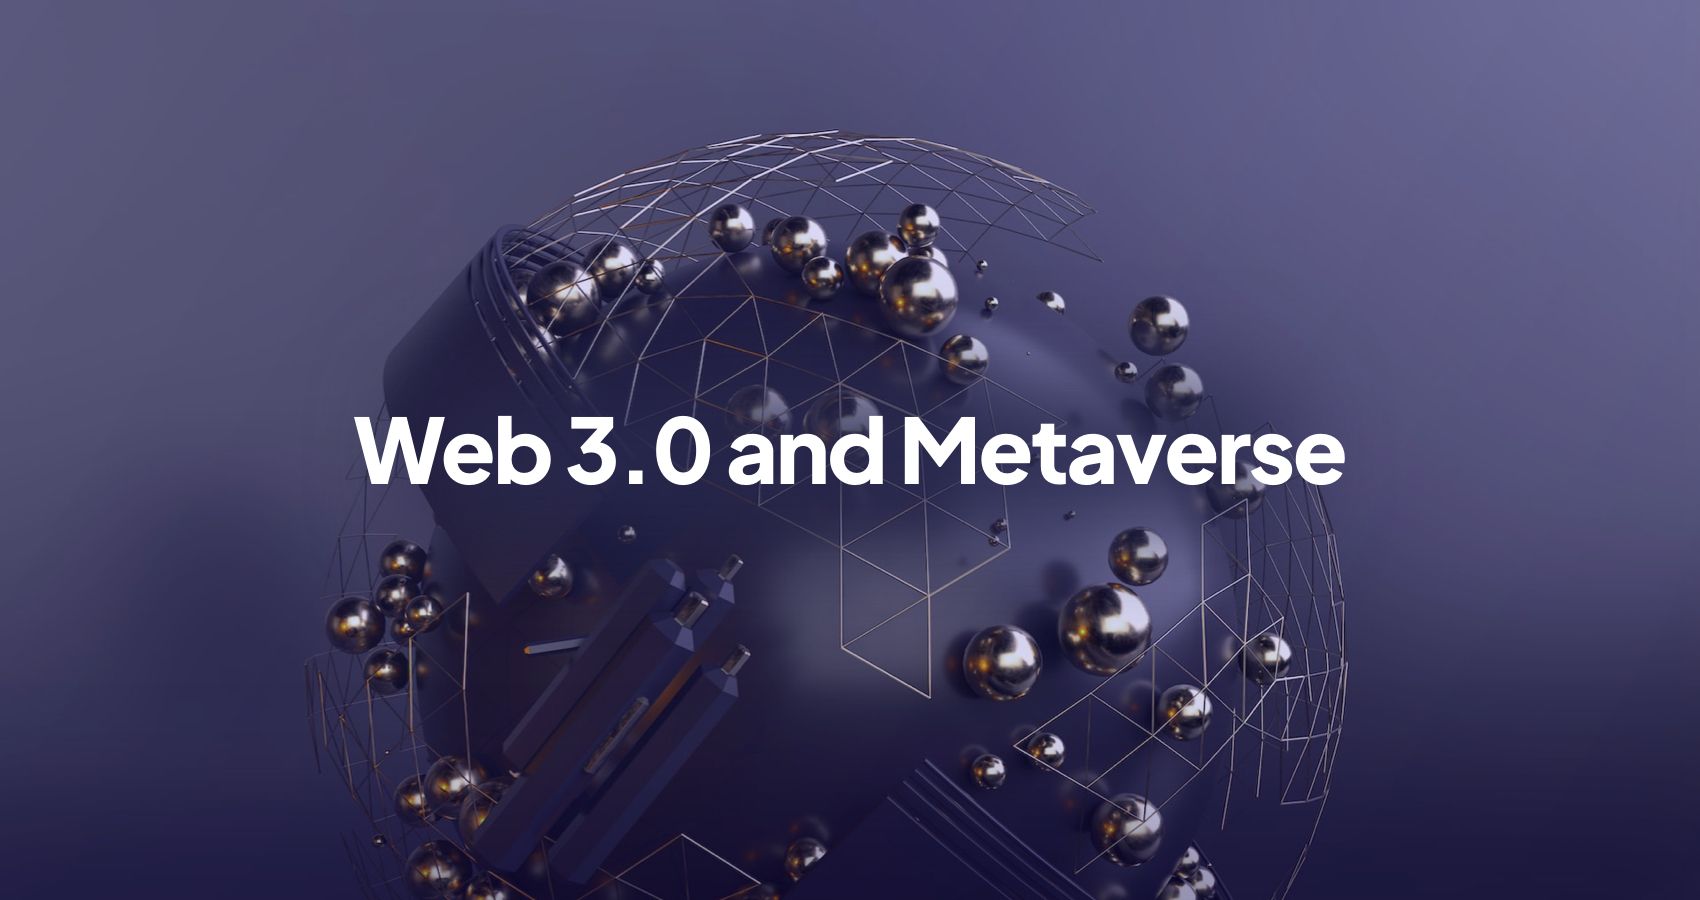 Metaverse, the future of the internet, explained